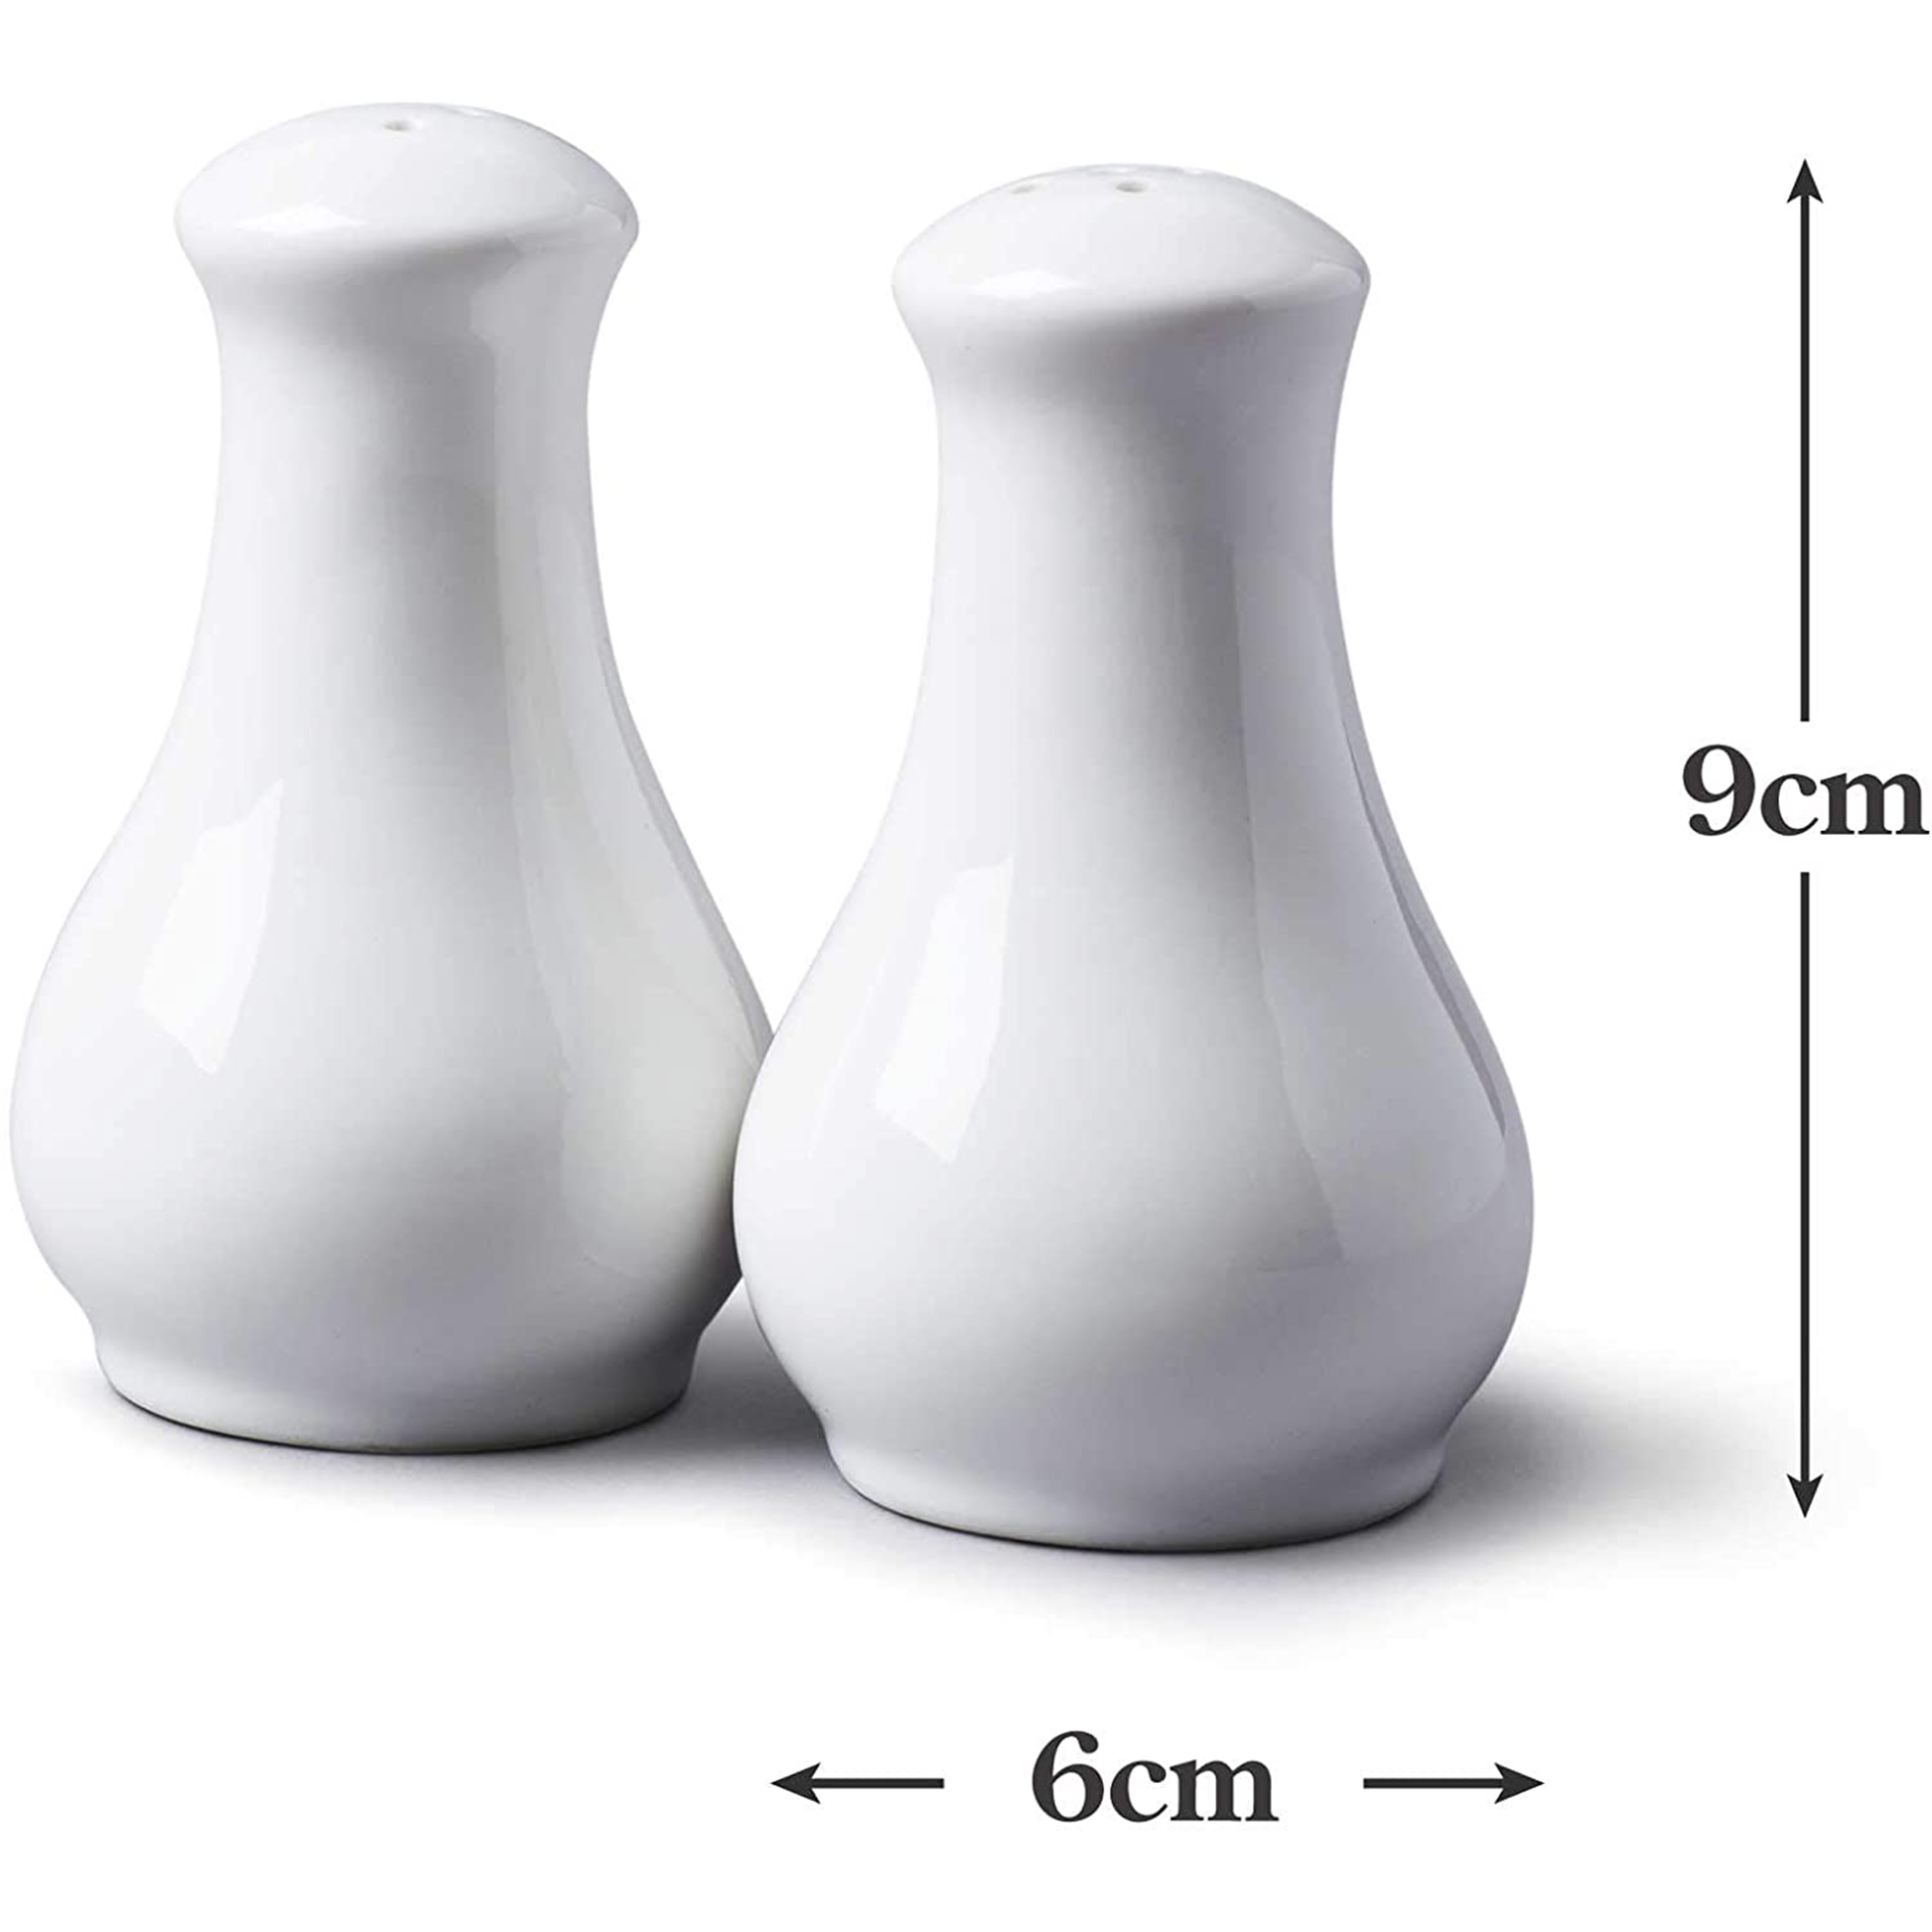 an image depicting the dimensions of the salt and pepper shakers